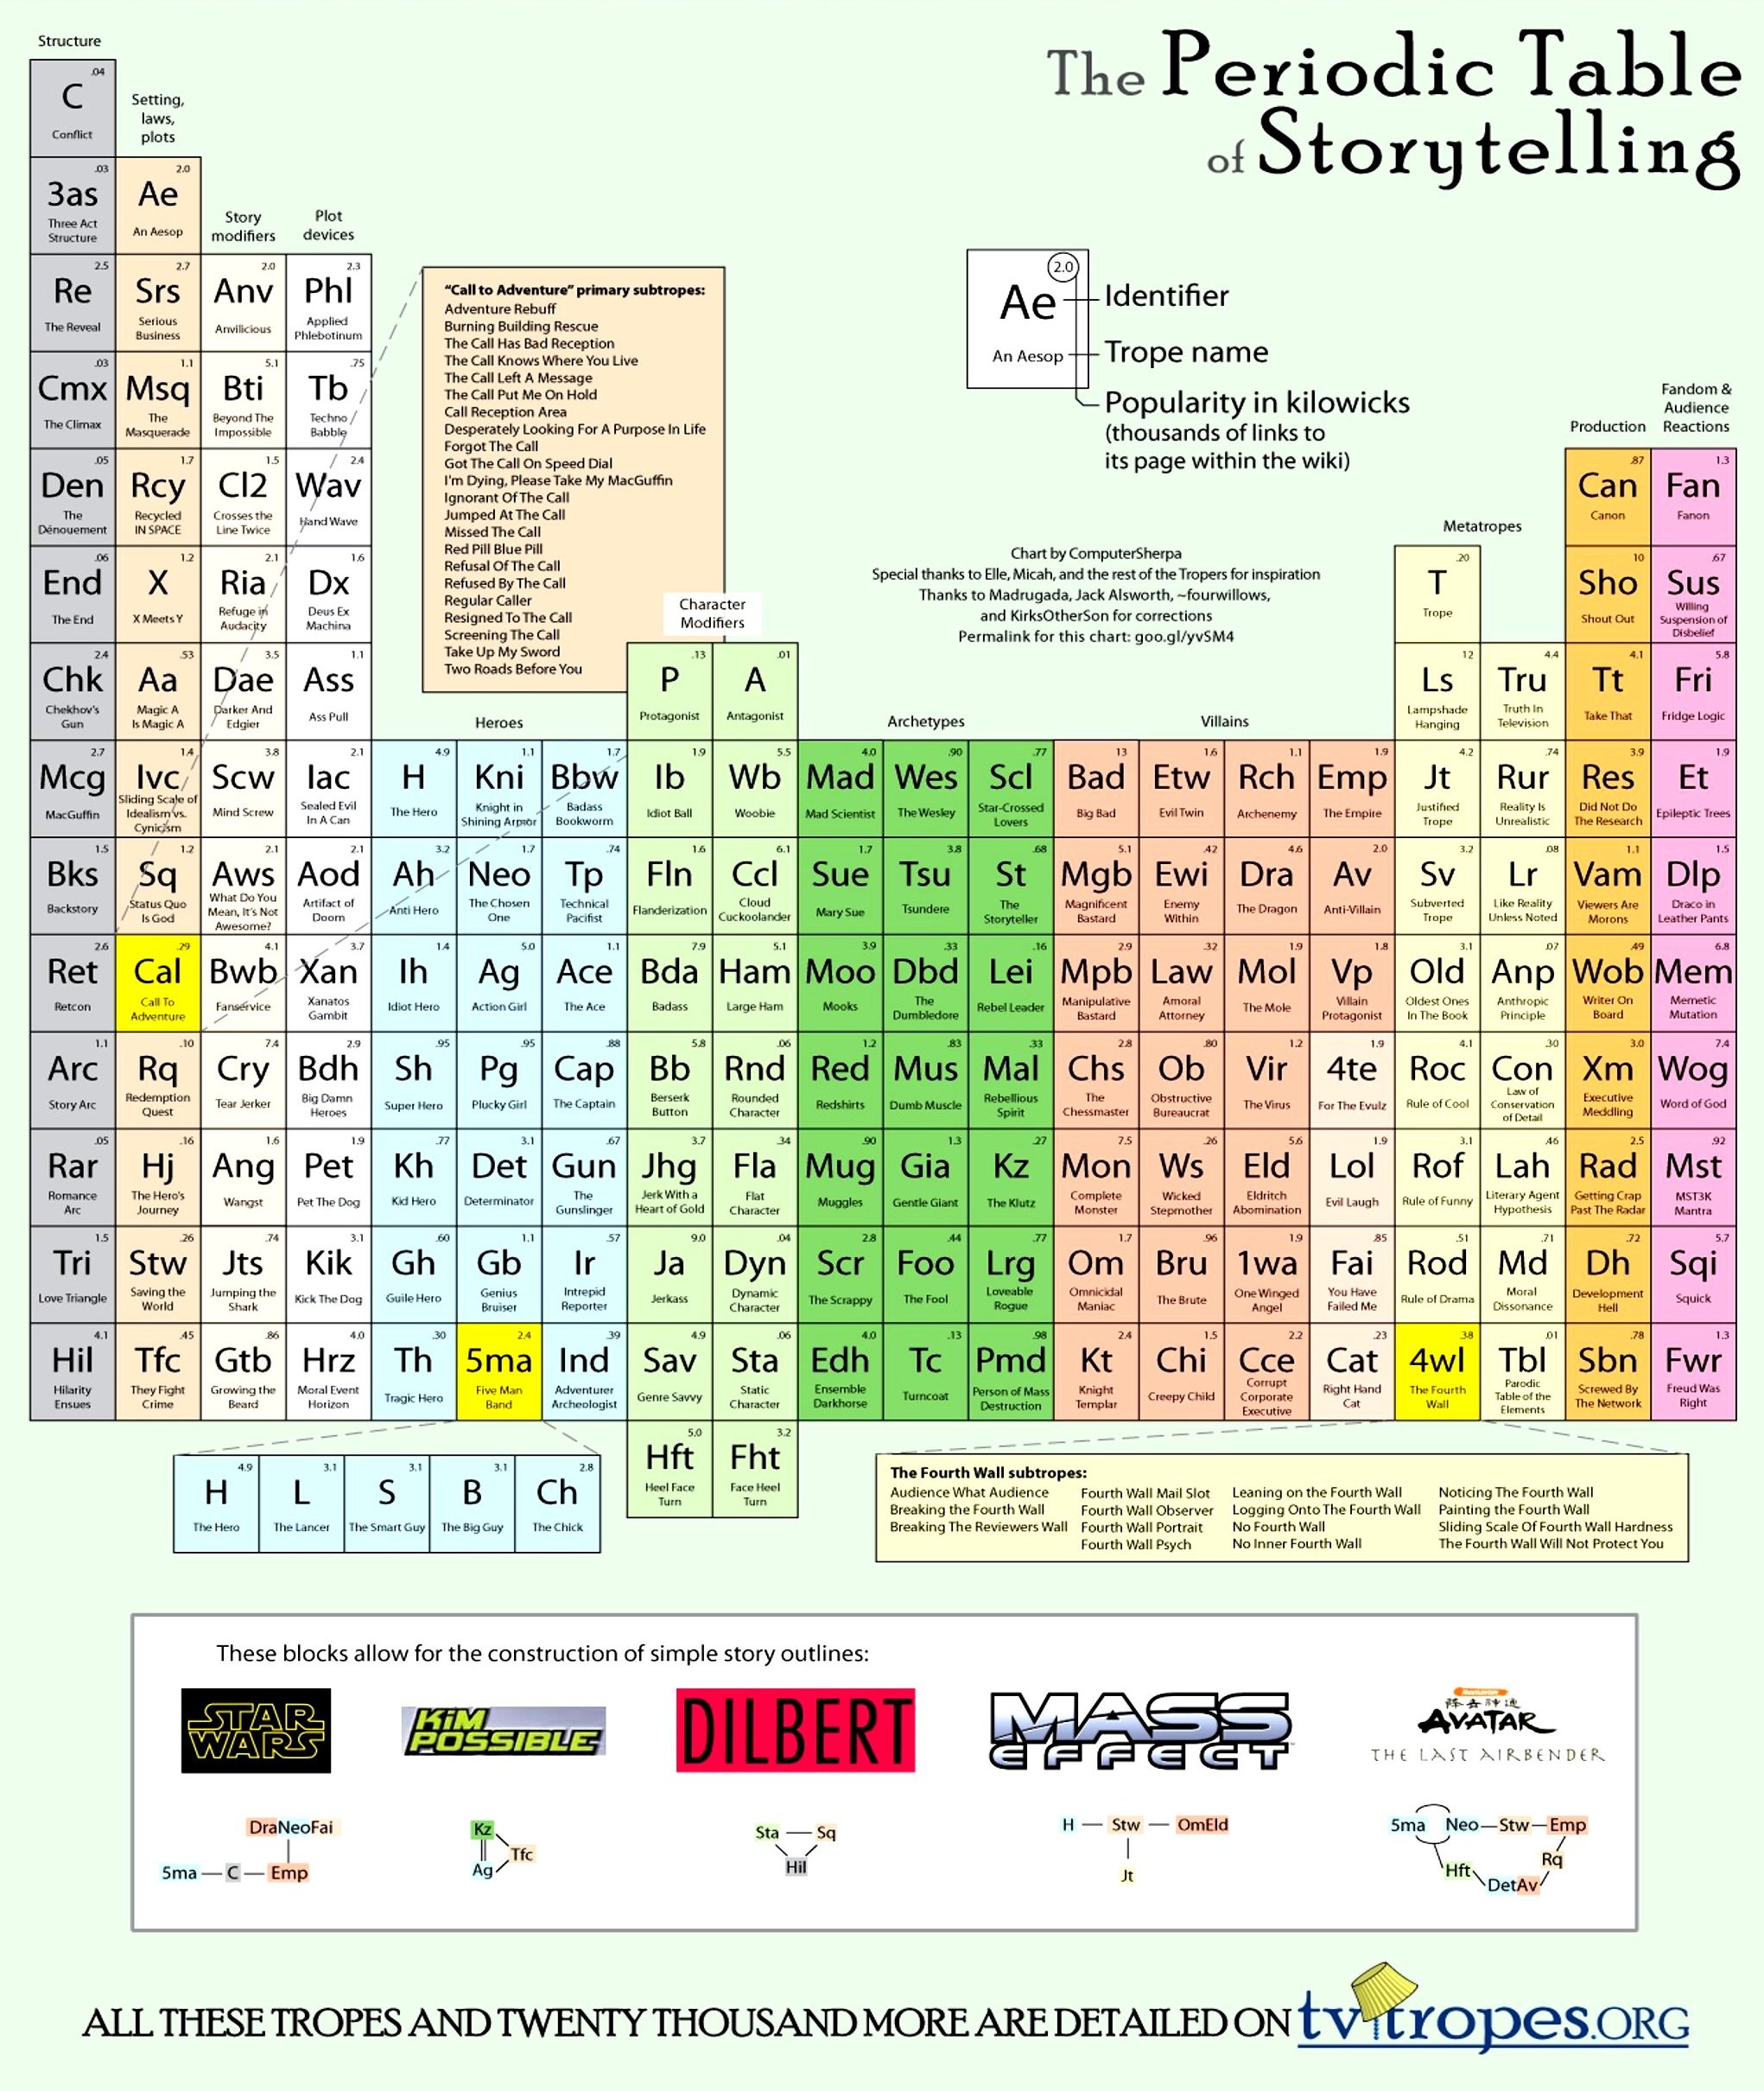 Dawn Paladin's "Periodic Table of Storytelling"